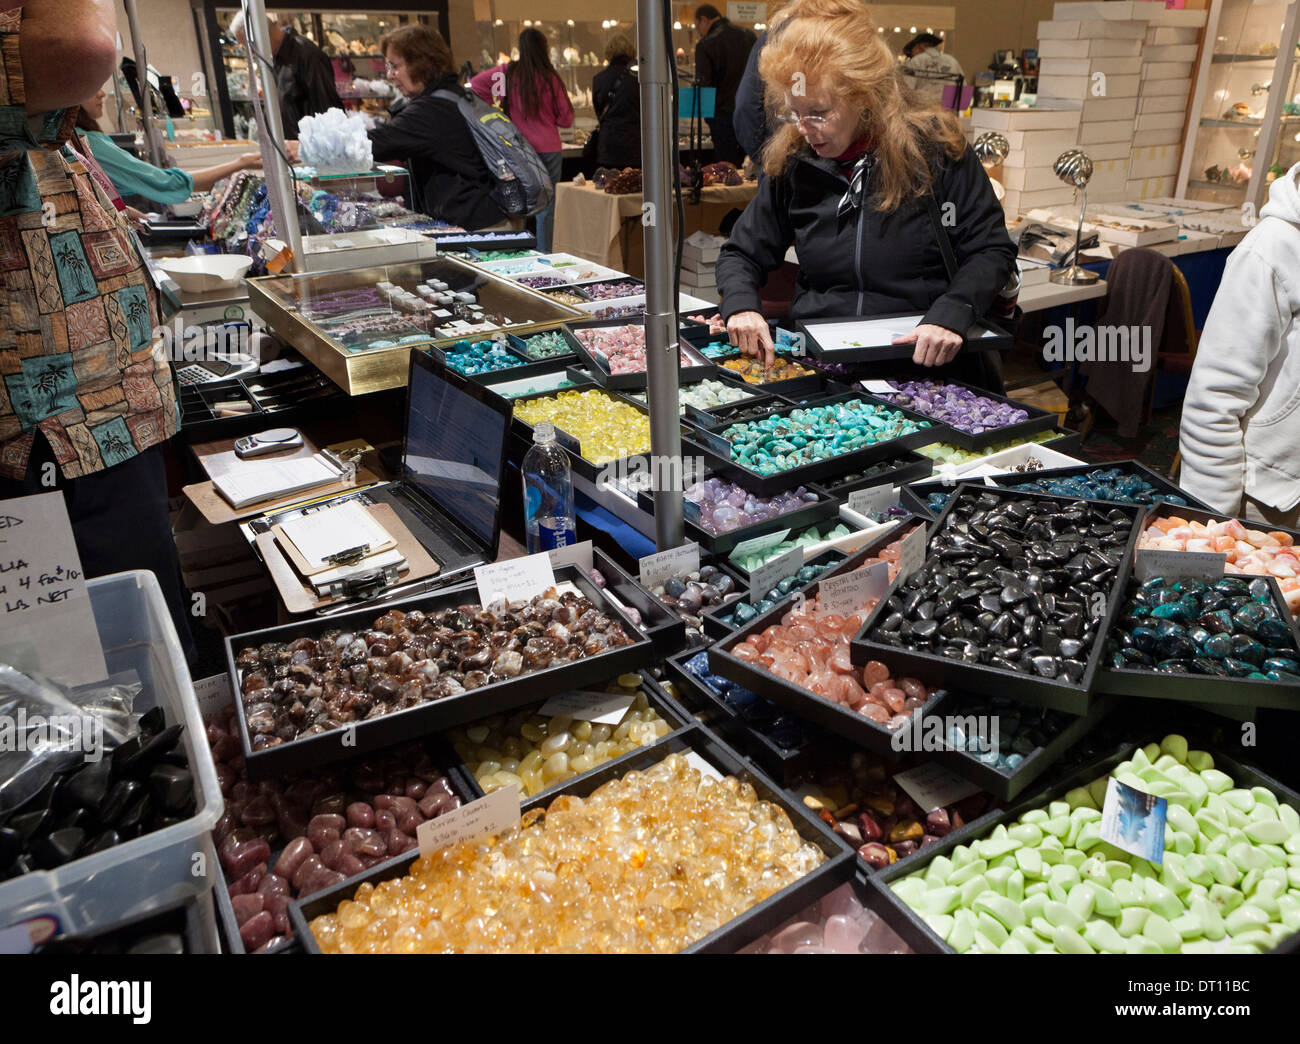 Displays of gems, minerals rocks, crystals, fossils, and meteorites at the yearly Gem and Mineral Show in Tucson, Arizona Stock Photo